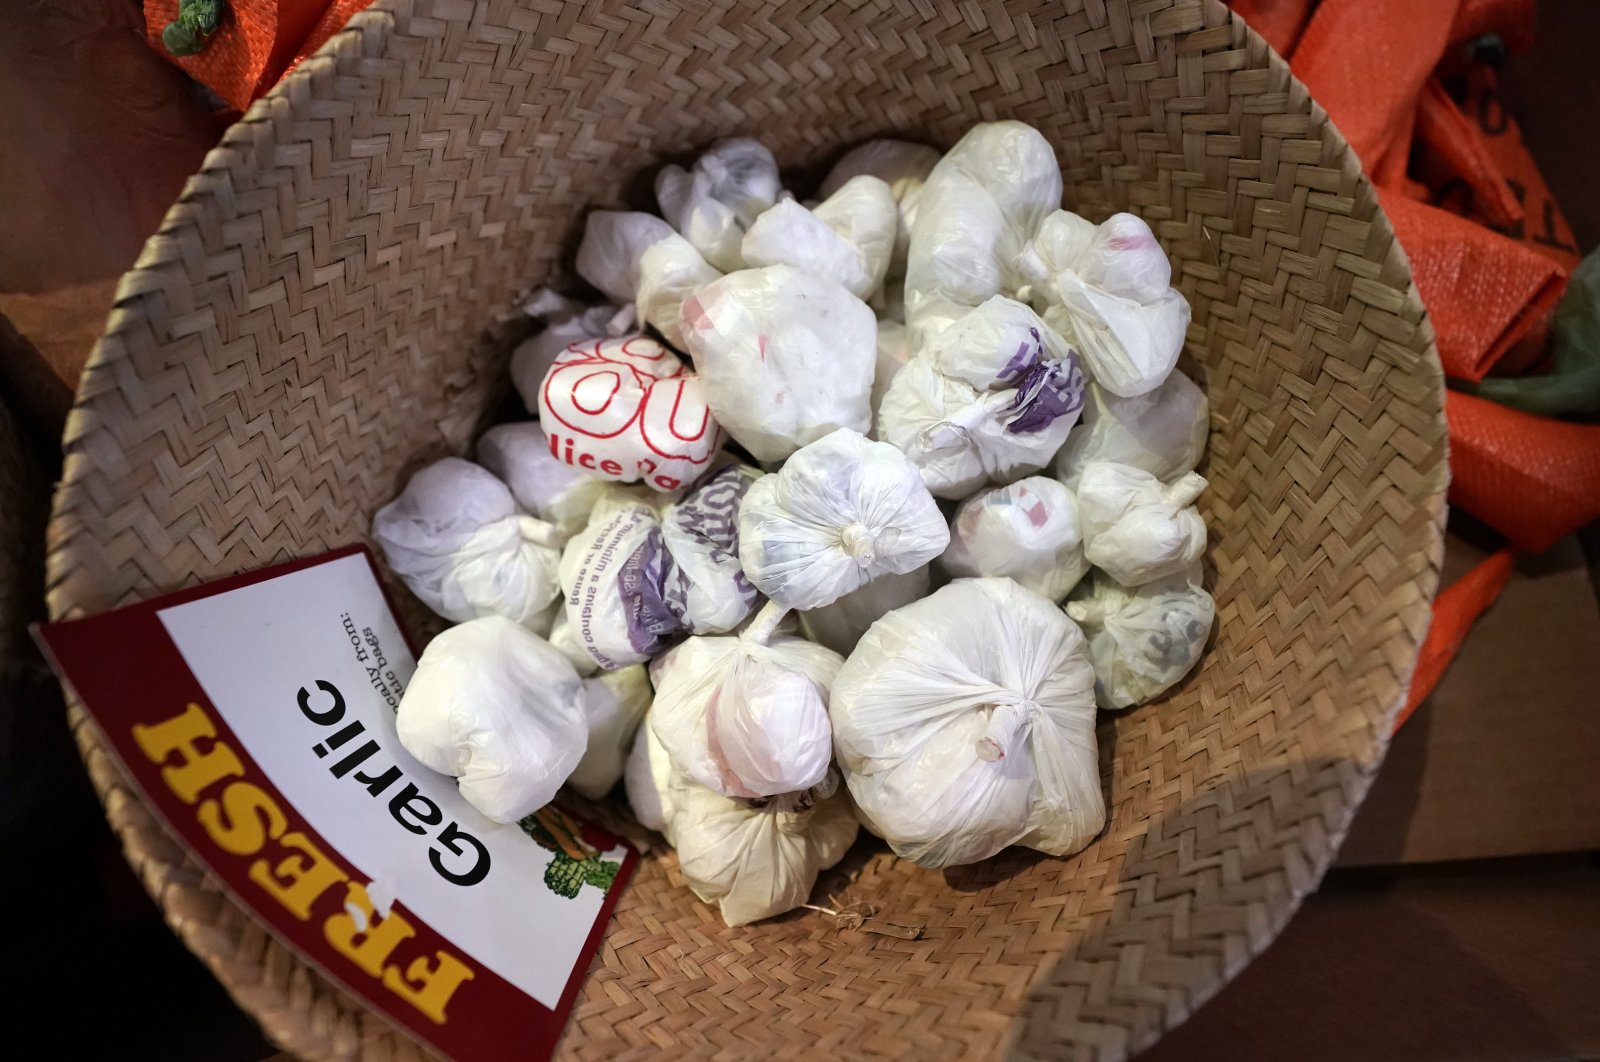 Garlic cloves made of plastic bags are displayed at a grocery store that features thousands of products made entirely of discarded plastic, in Ann Arbor, Michigan, U.S., Jan. 17, 2023. (AP Photo)